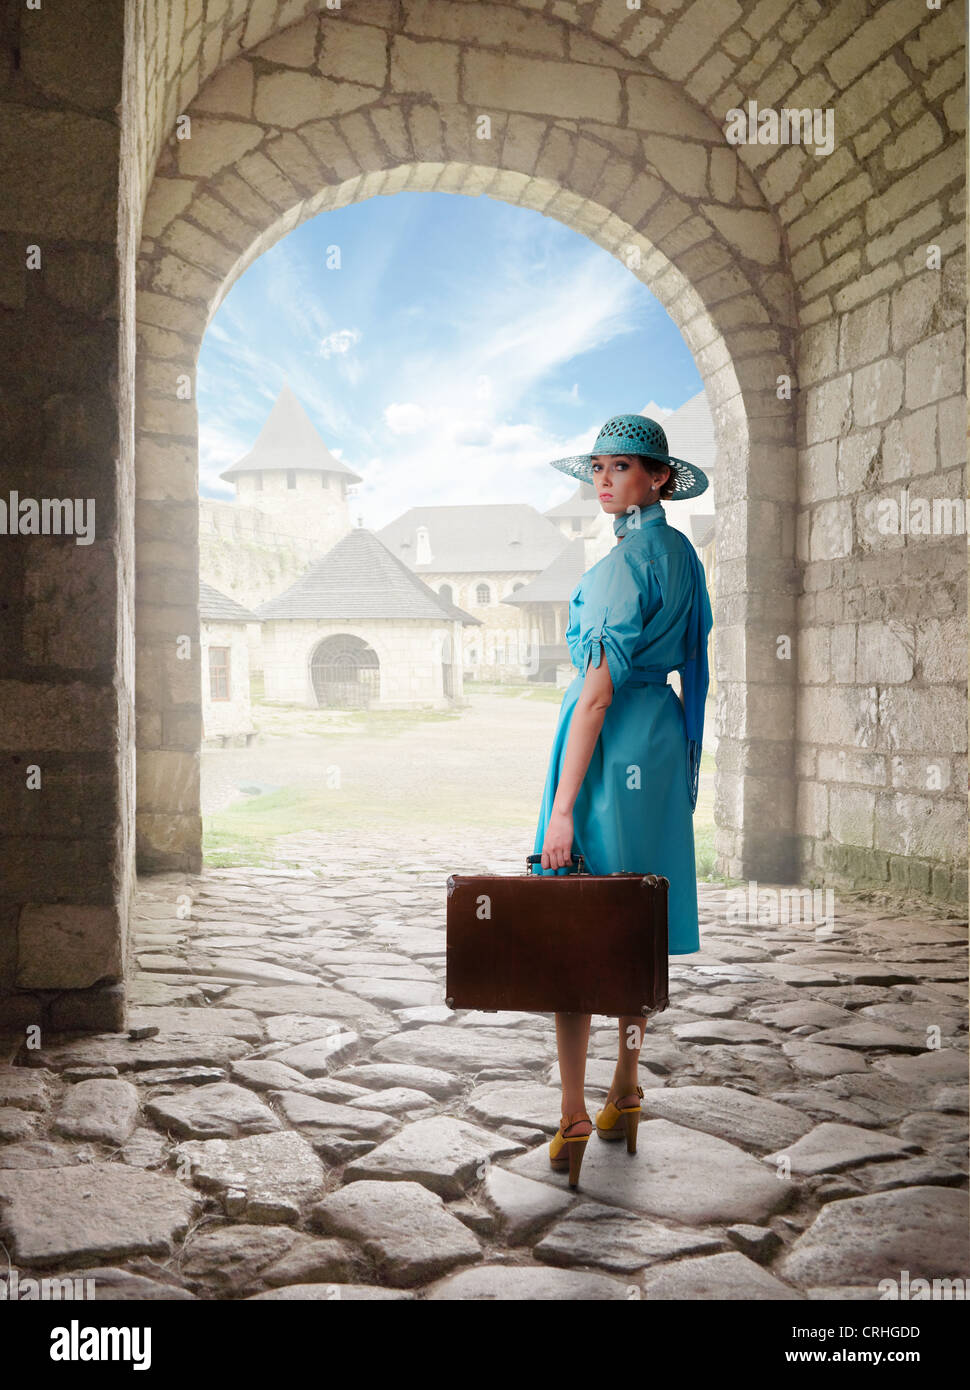 traveling woman in retro clothing.Collage with old castle as a background Stock Photo